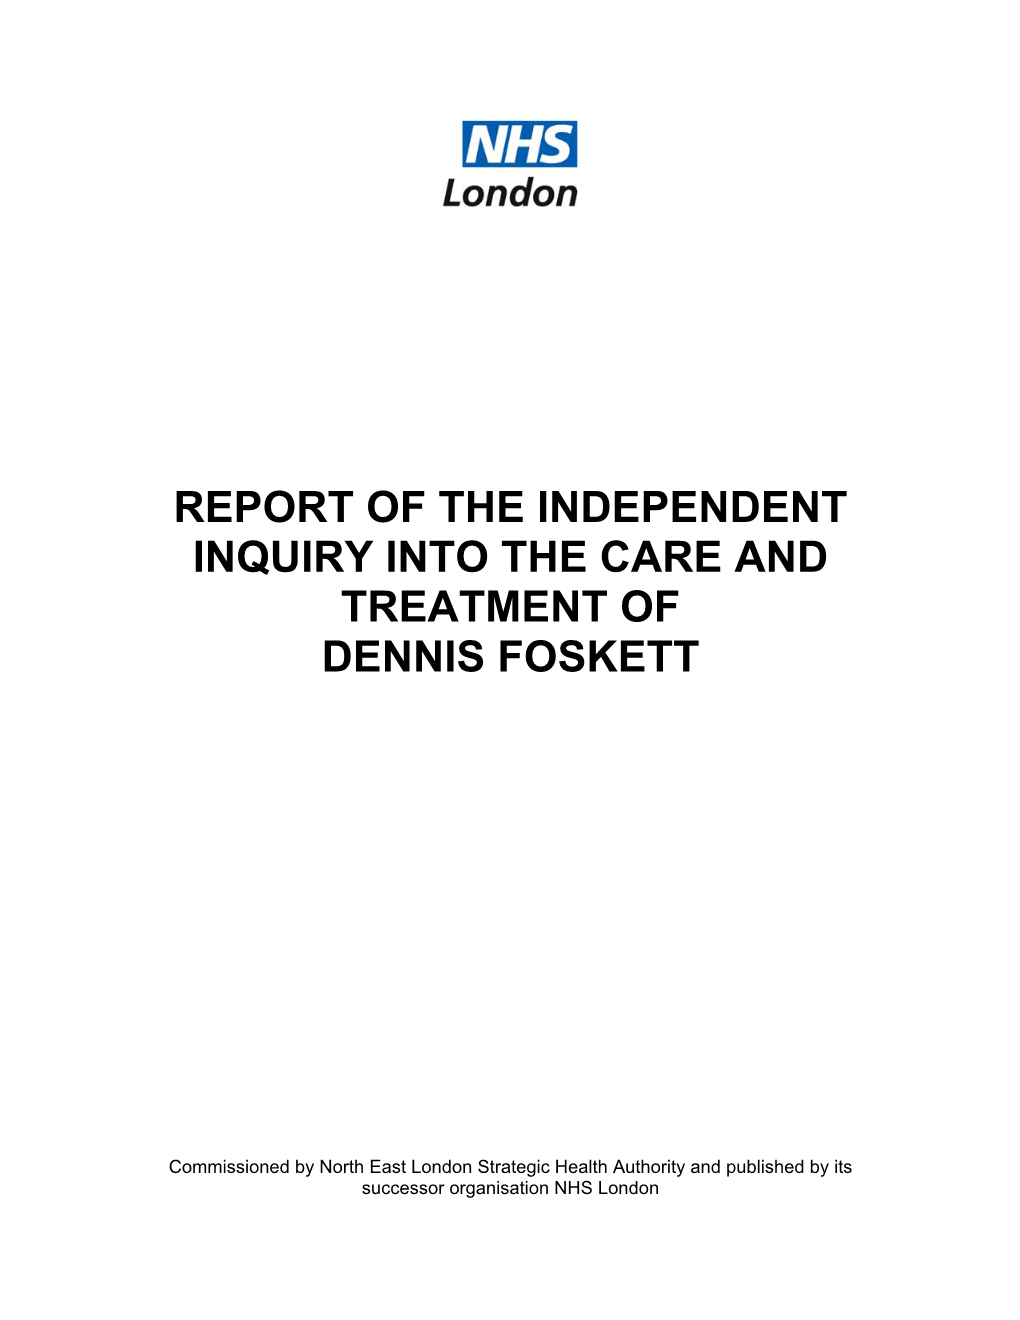 Report of the Independent Inquiry Into the Care and Treatment of Dennis Foskett